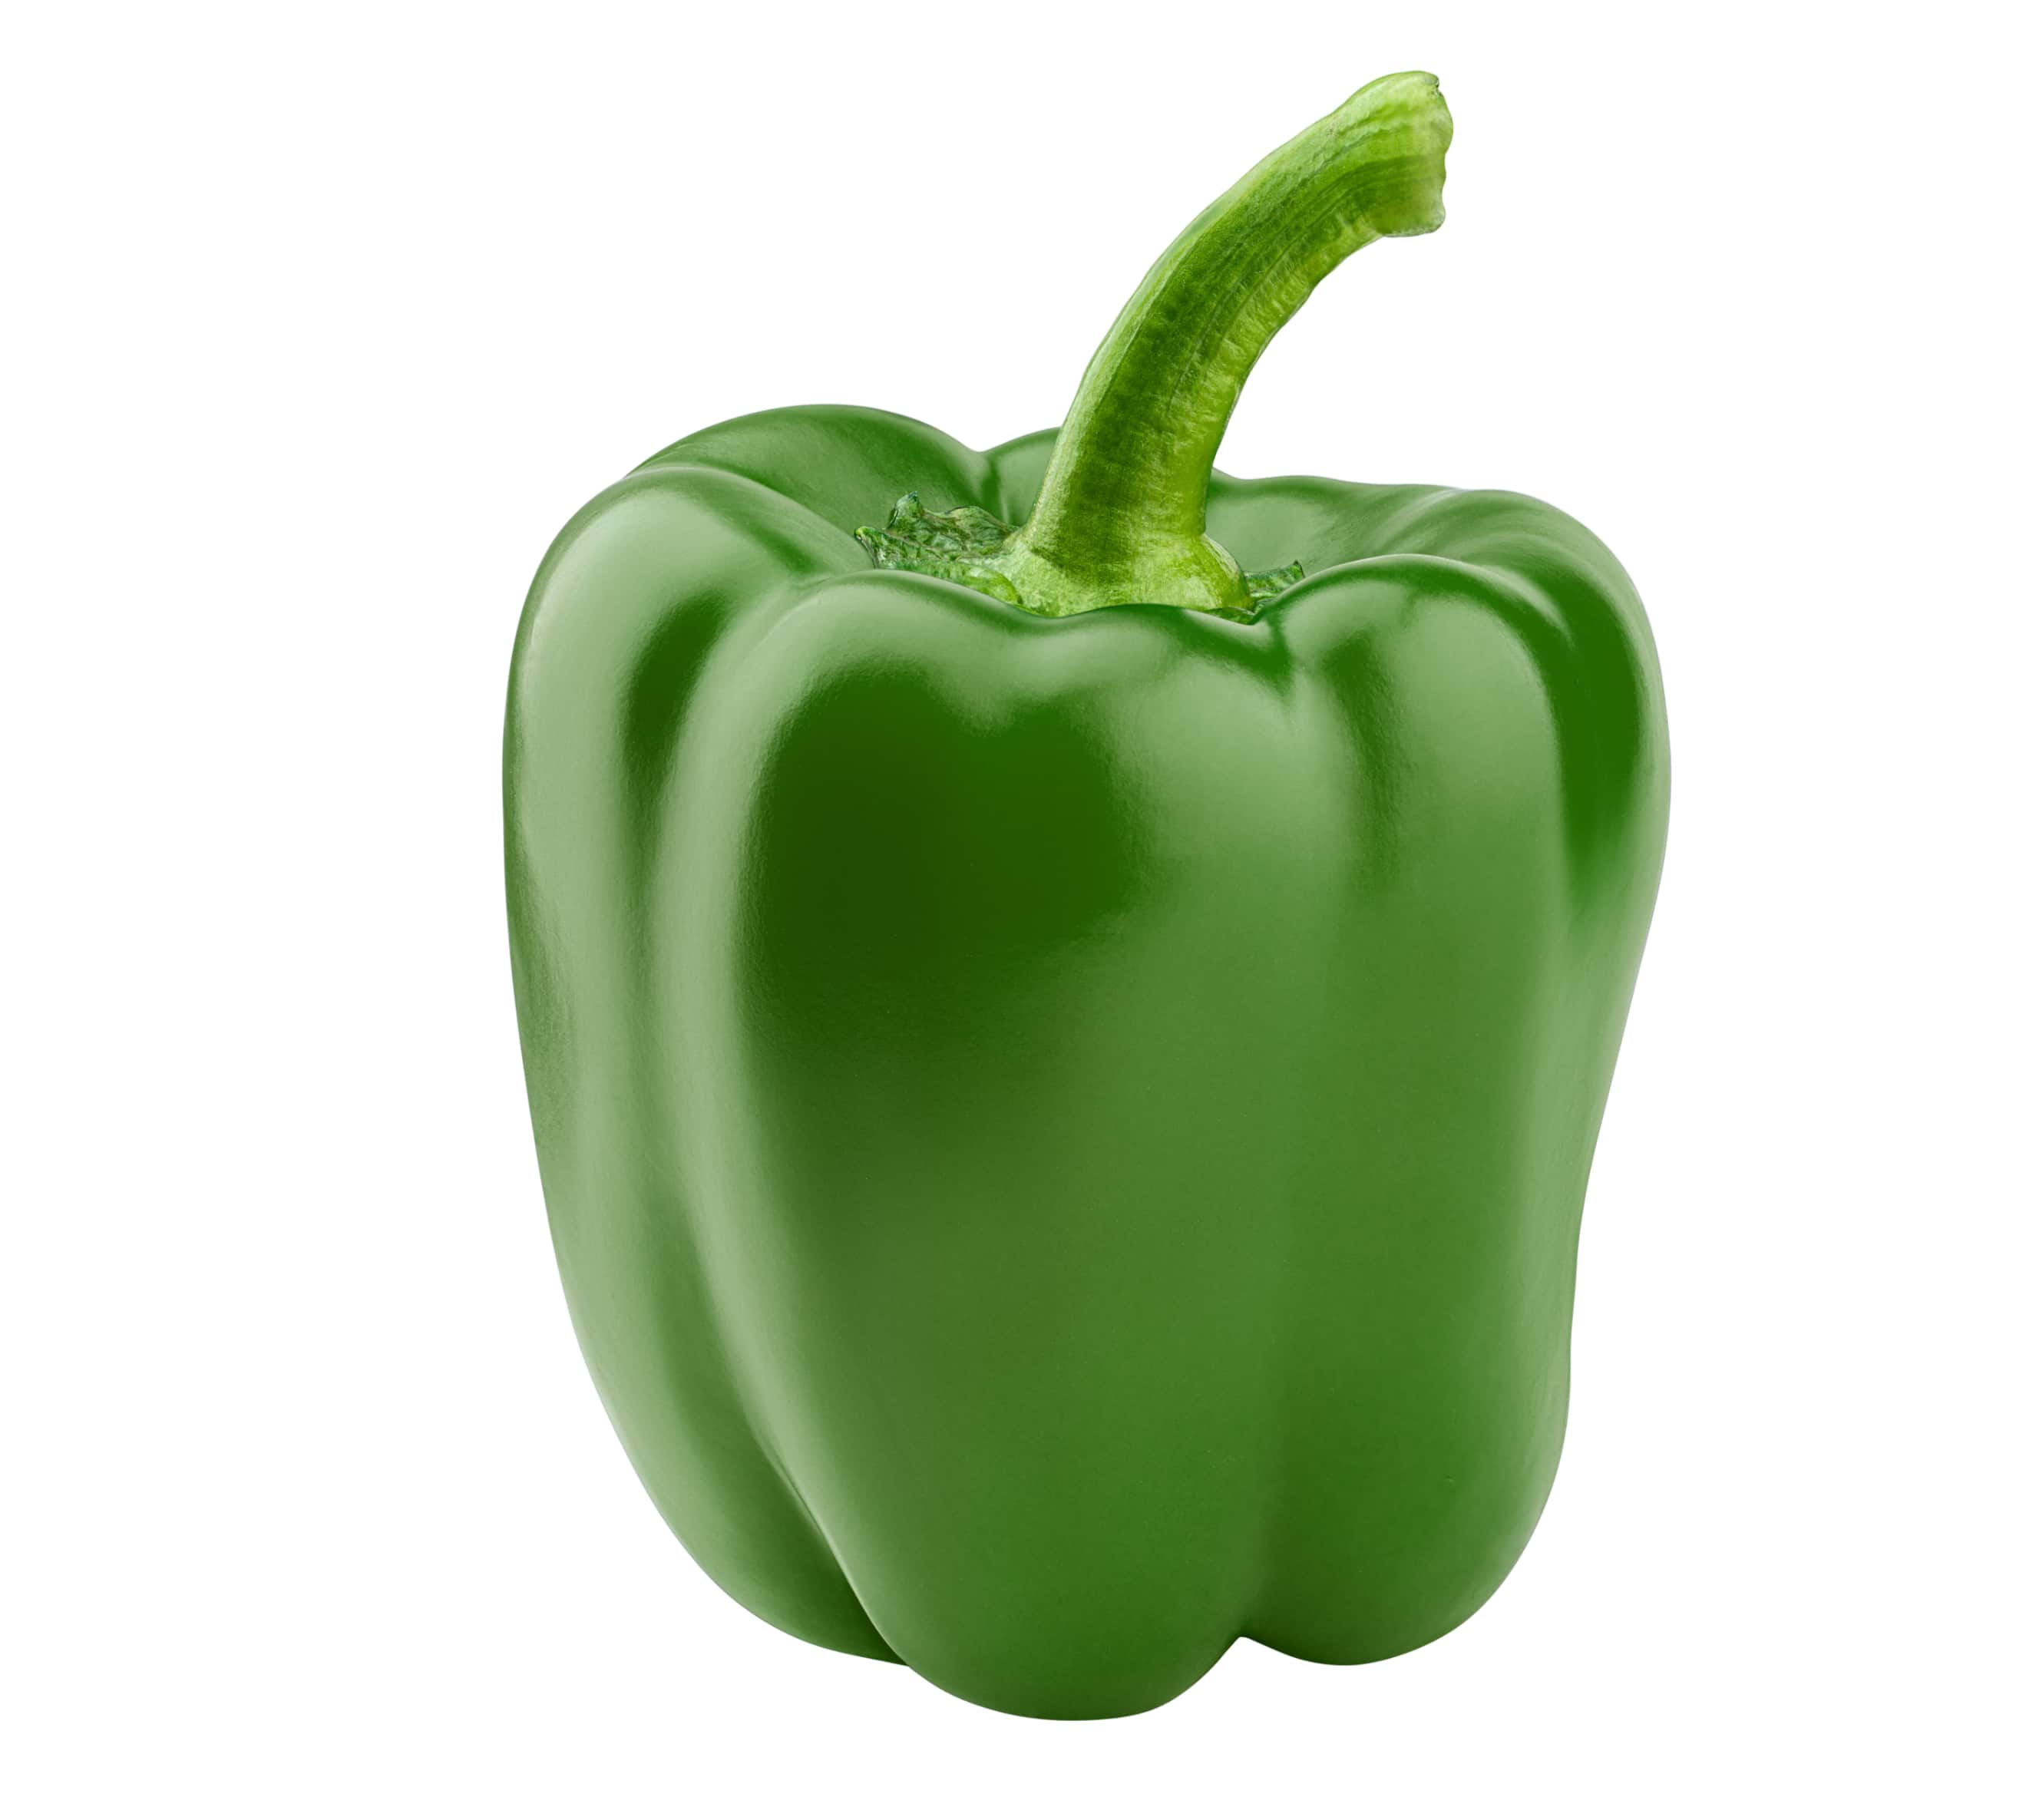 Maxi Bell Sweet Pepper from Royal Seed. Grow maxibell Peppers with Superior Flavor and Size. Shop Seeds Today!